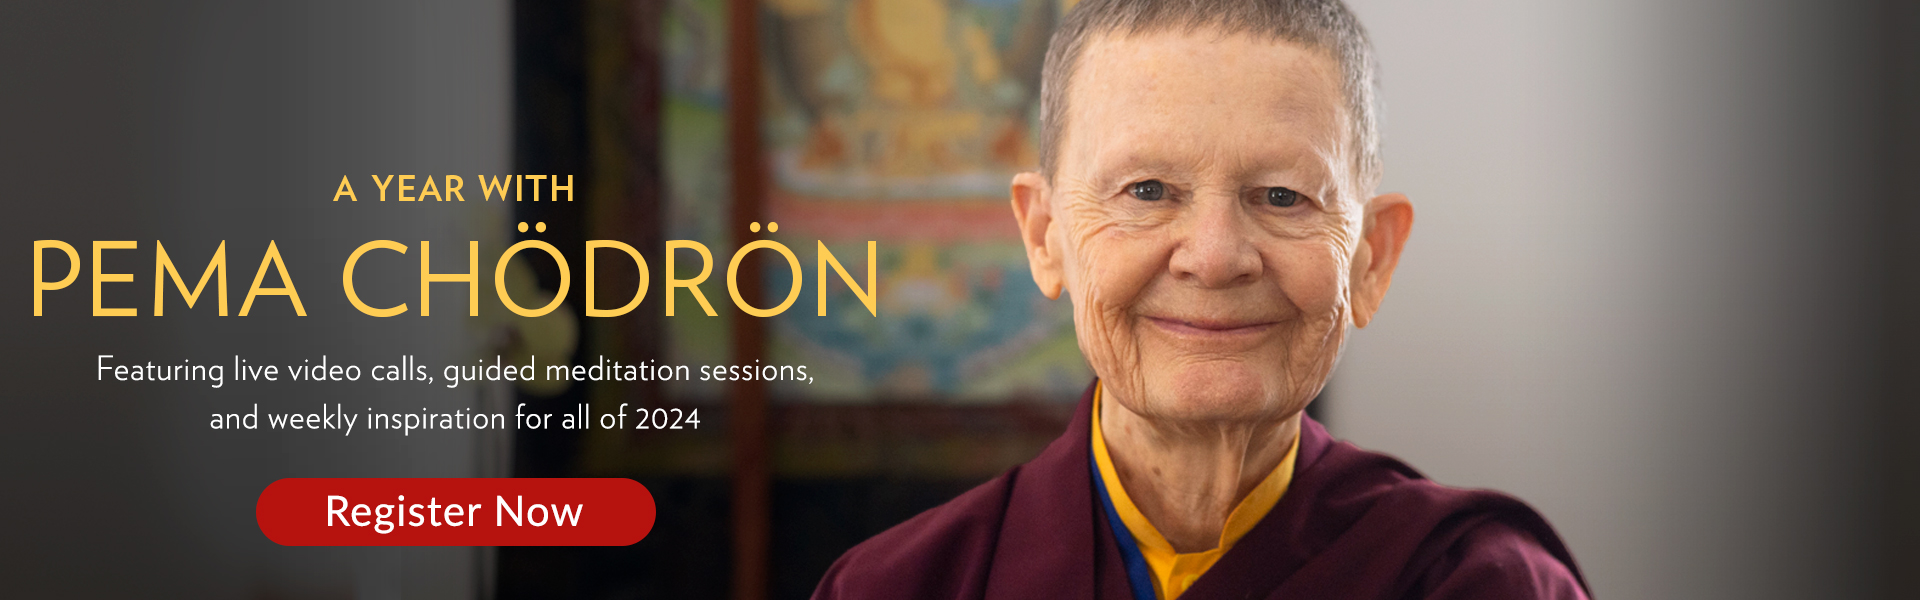 A Year with Pema Chodron